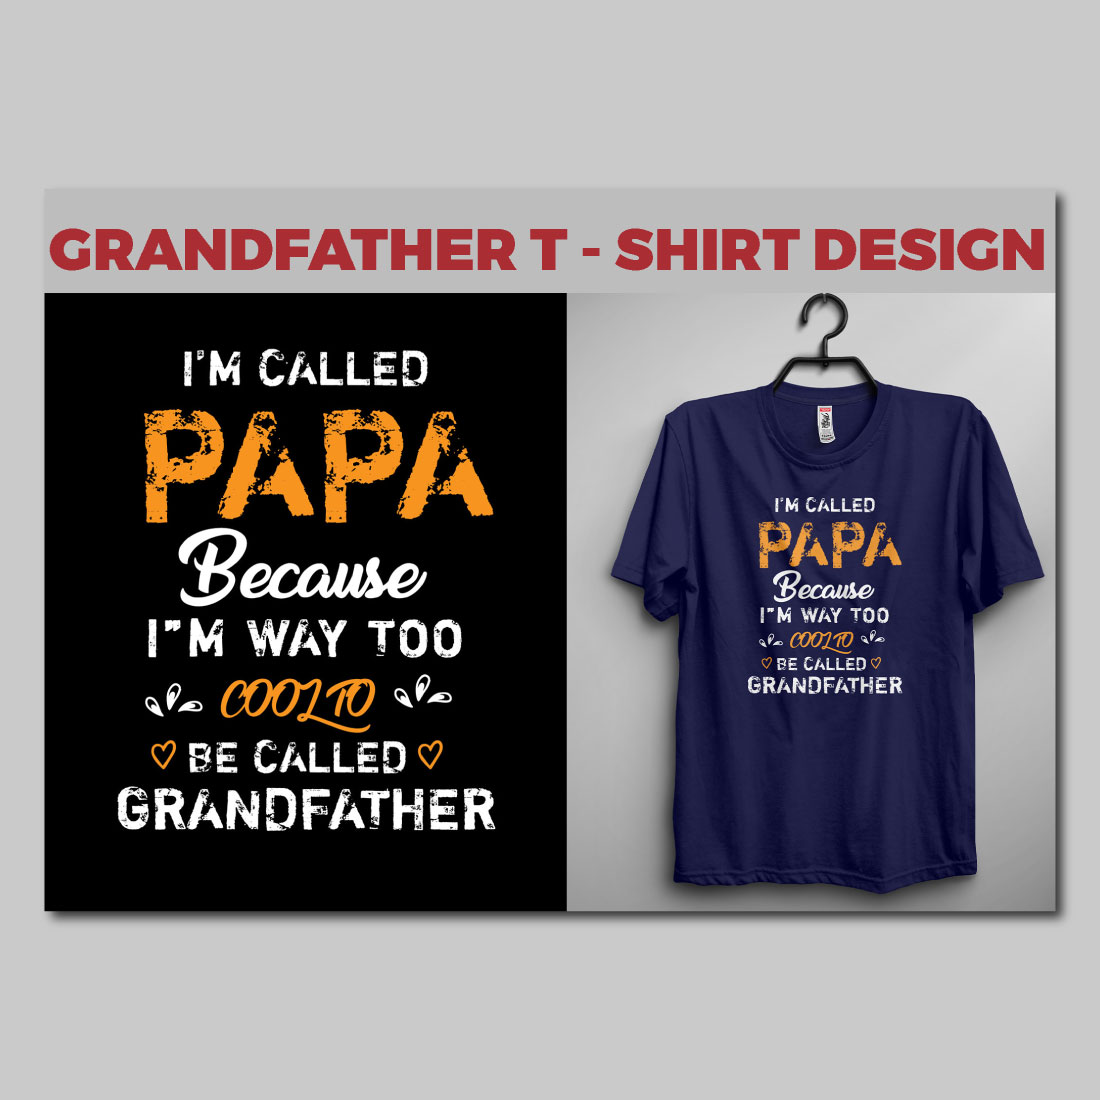 Grandfather T - Shirt Design Images preview image.